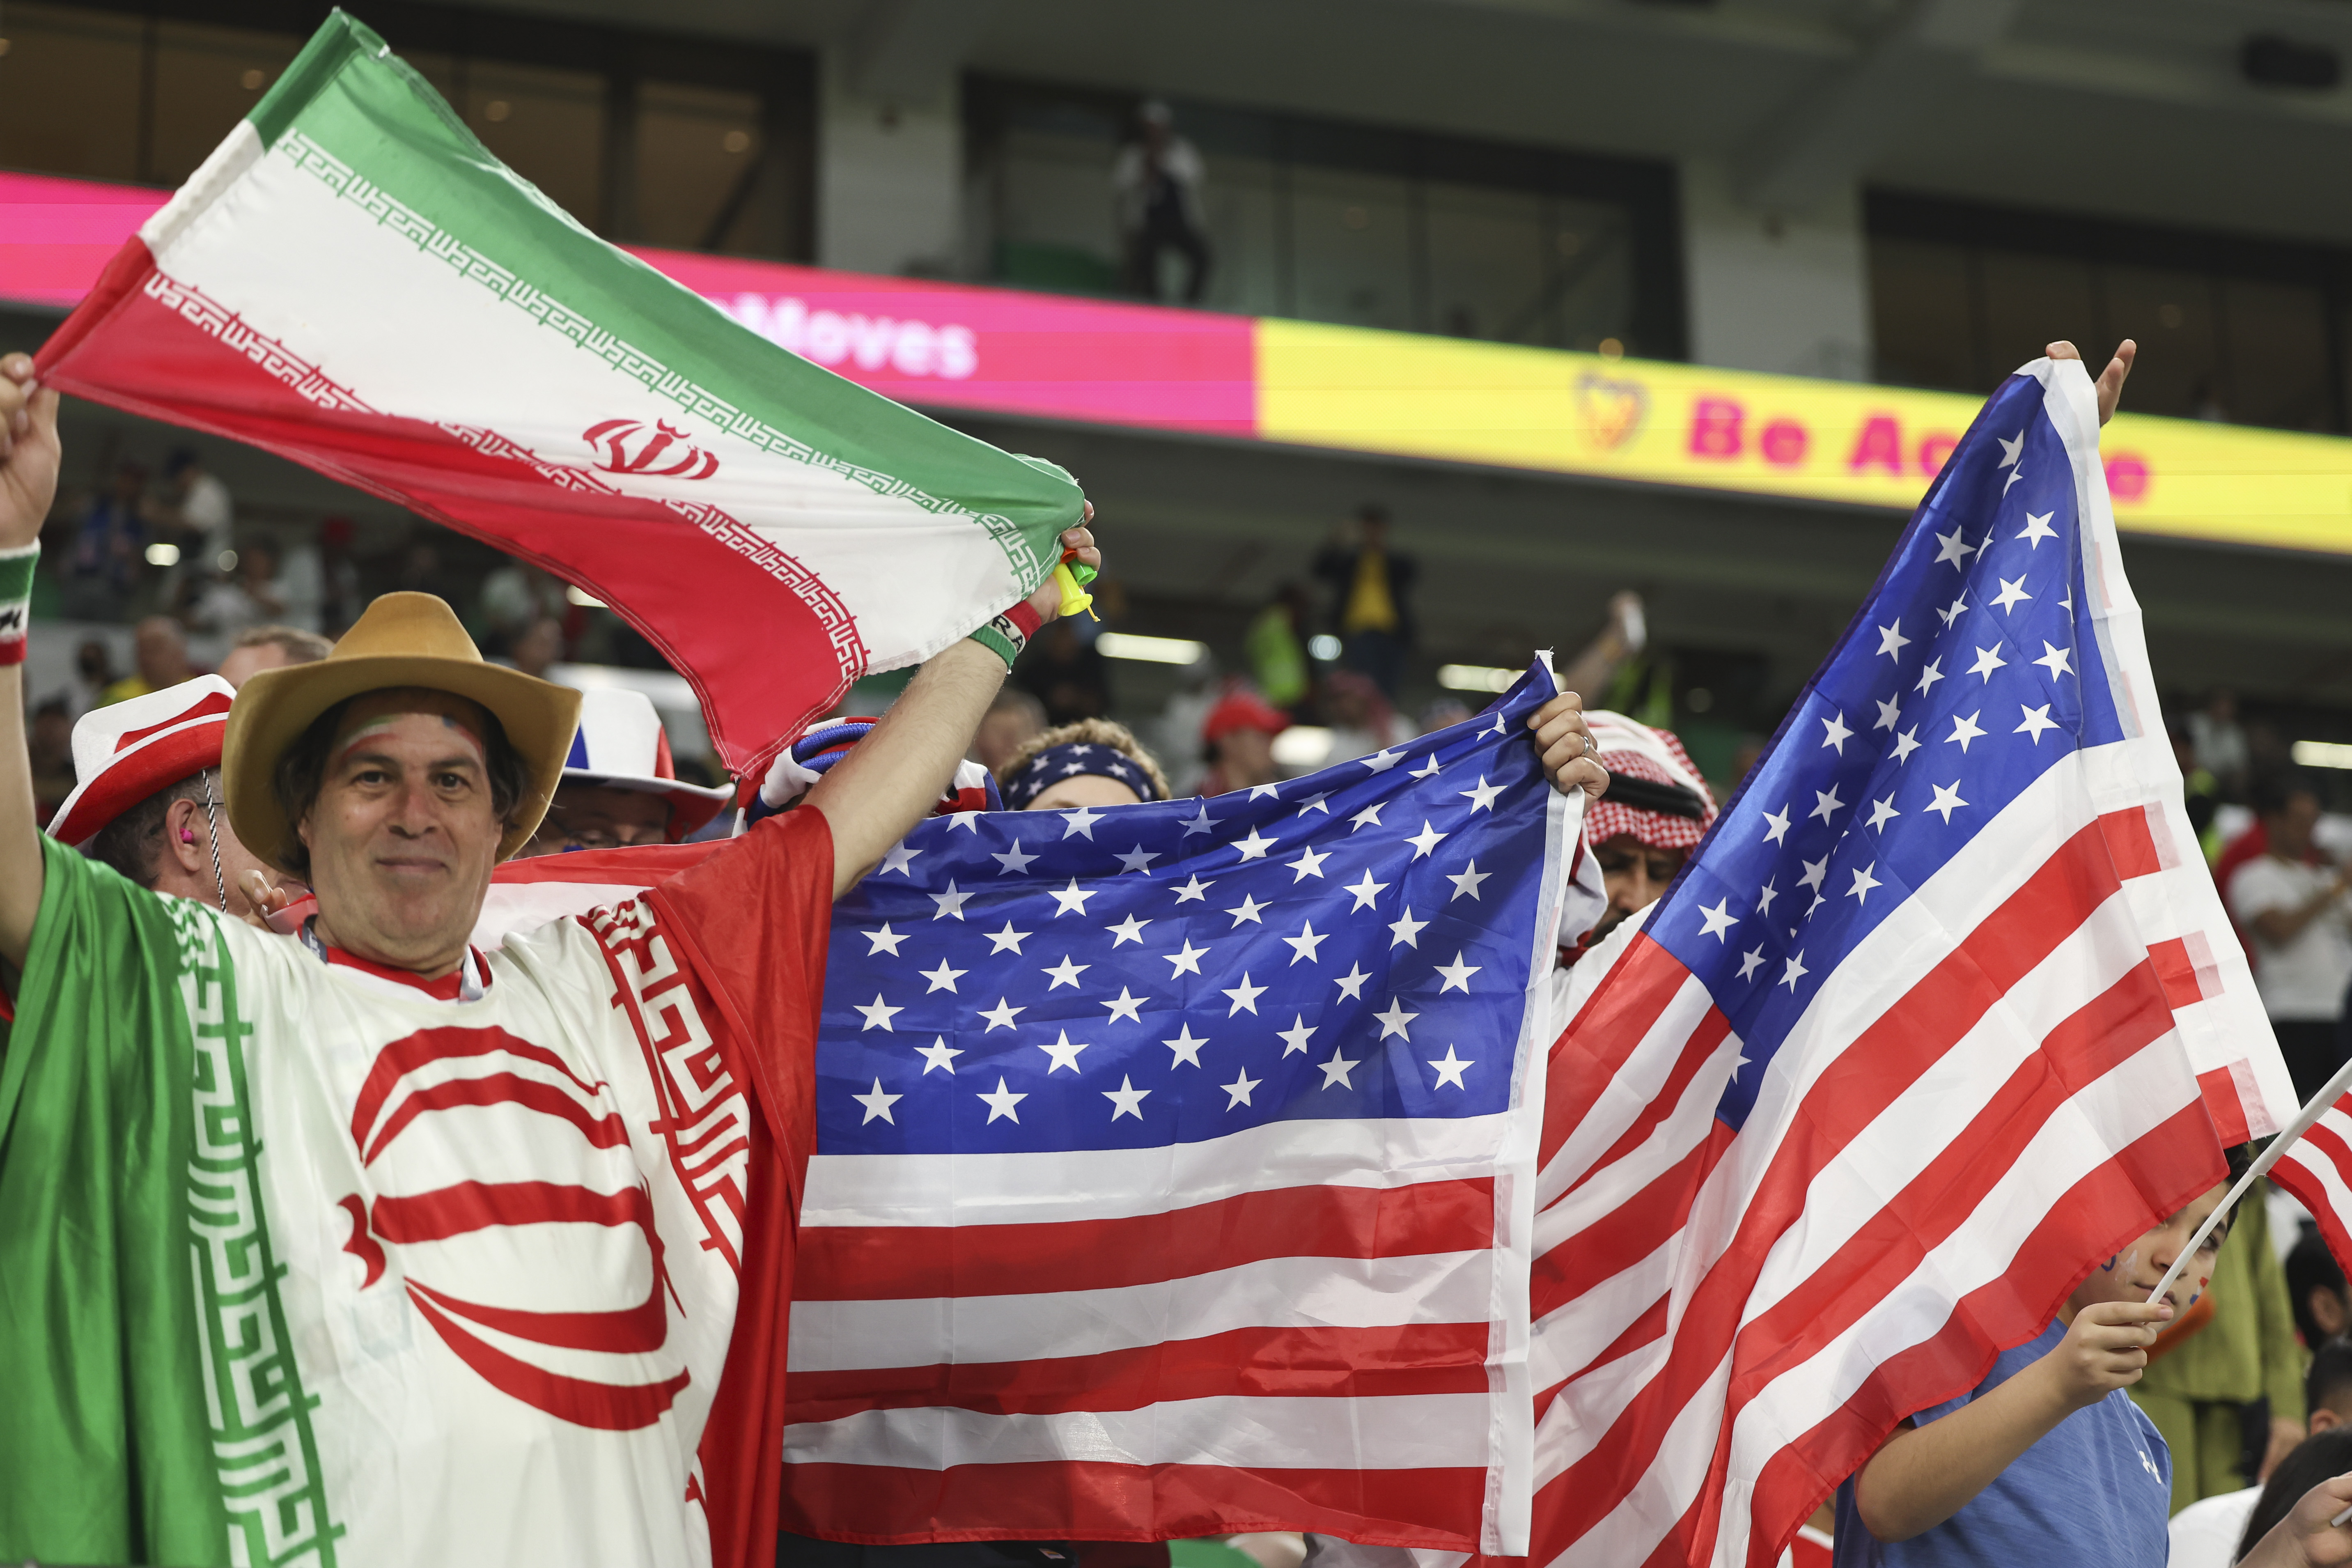 Fans of Iran and USA together with flags during the FIFA World Cup Qatar 2022 Group B match between IR Iran and USA at Al Thumama Stadium on November 29, 2022 in Doha, Qatar.